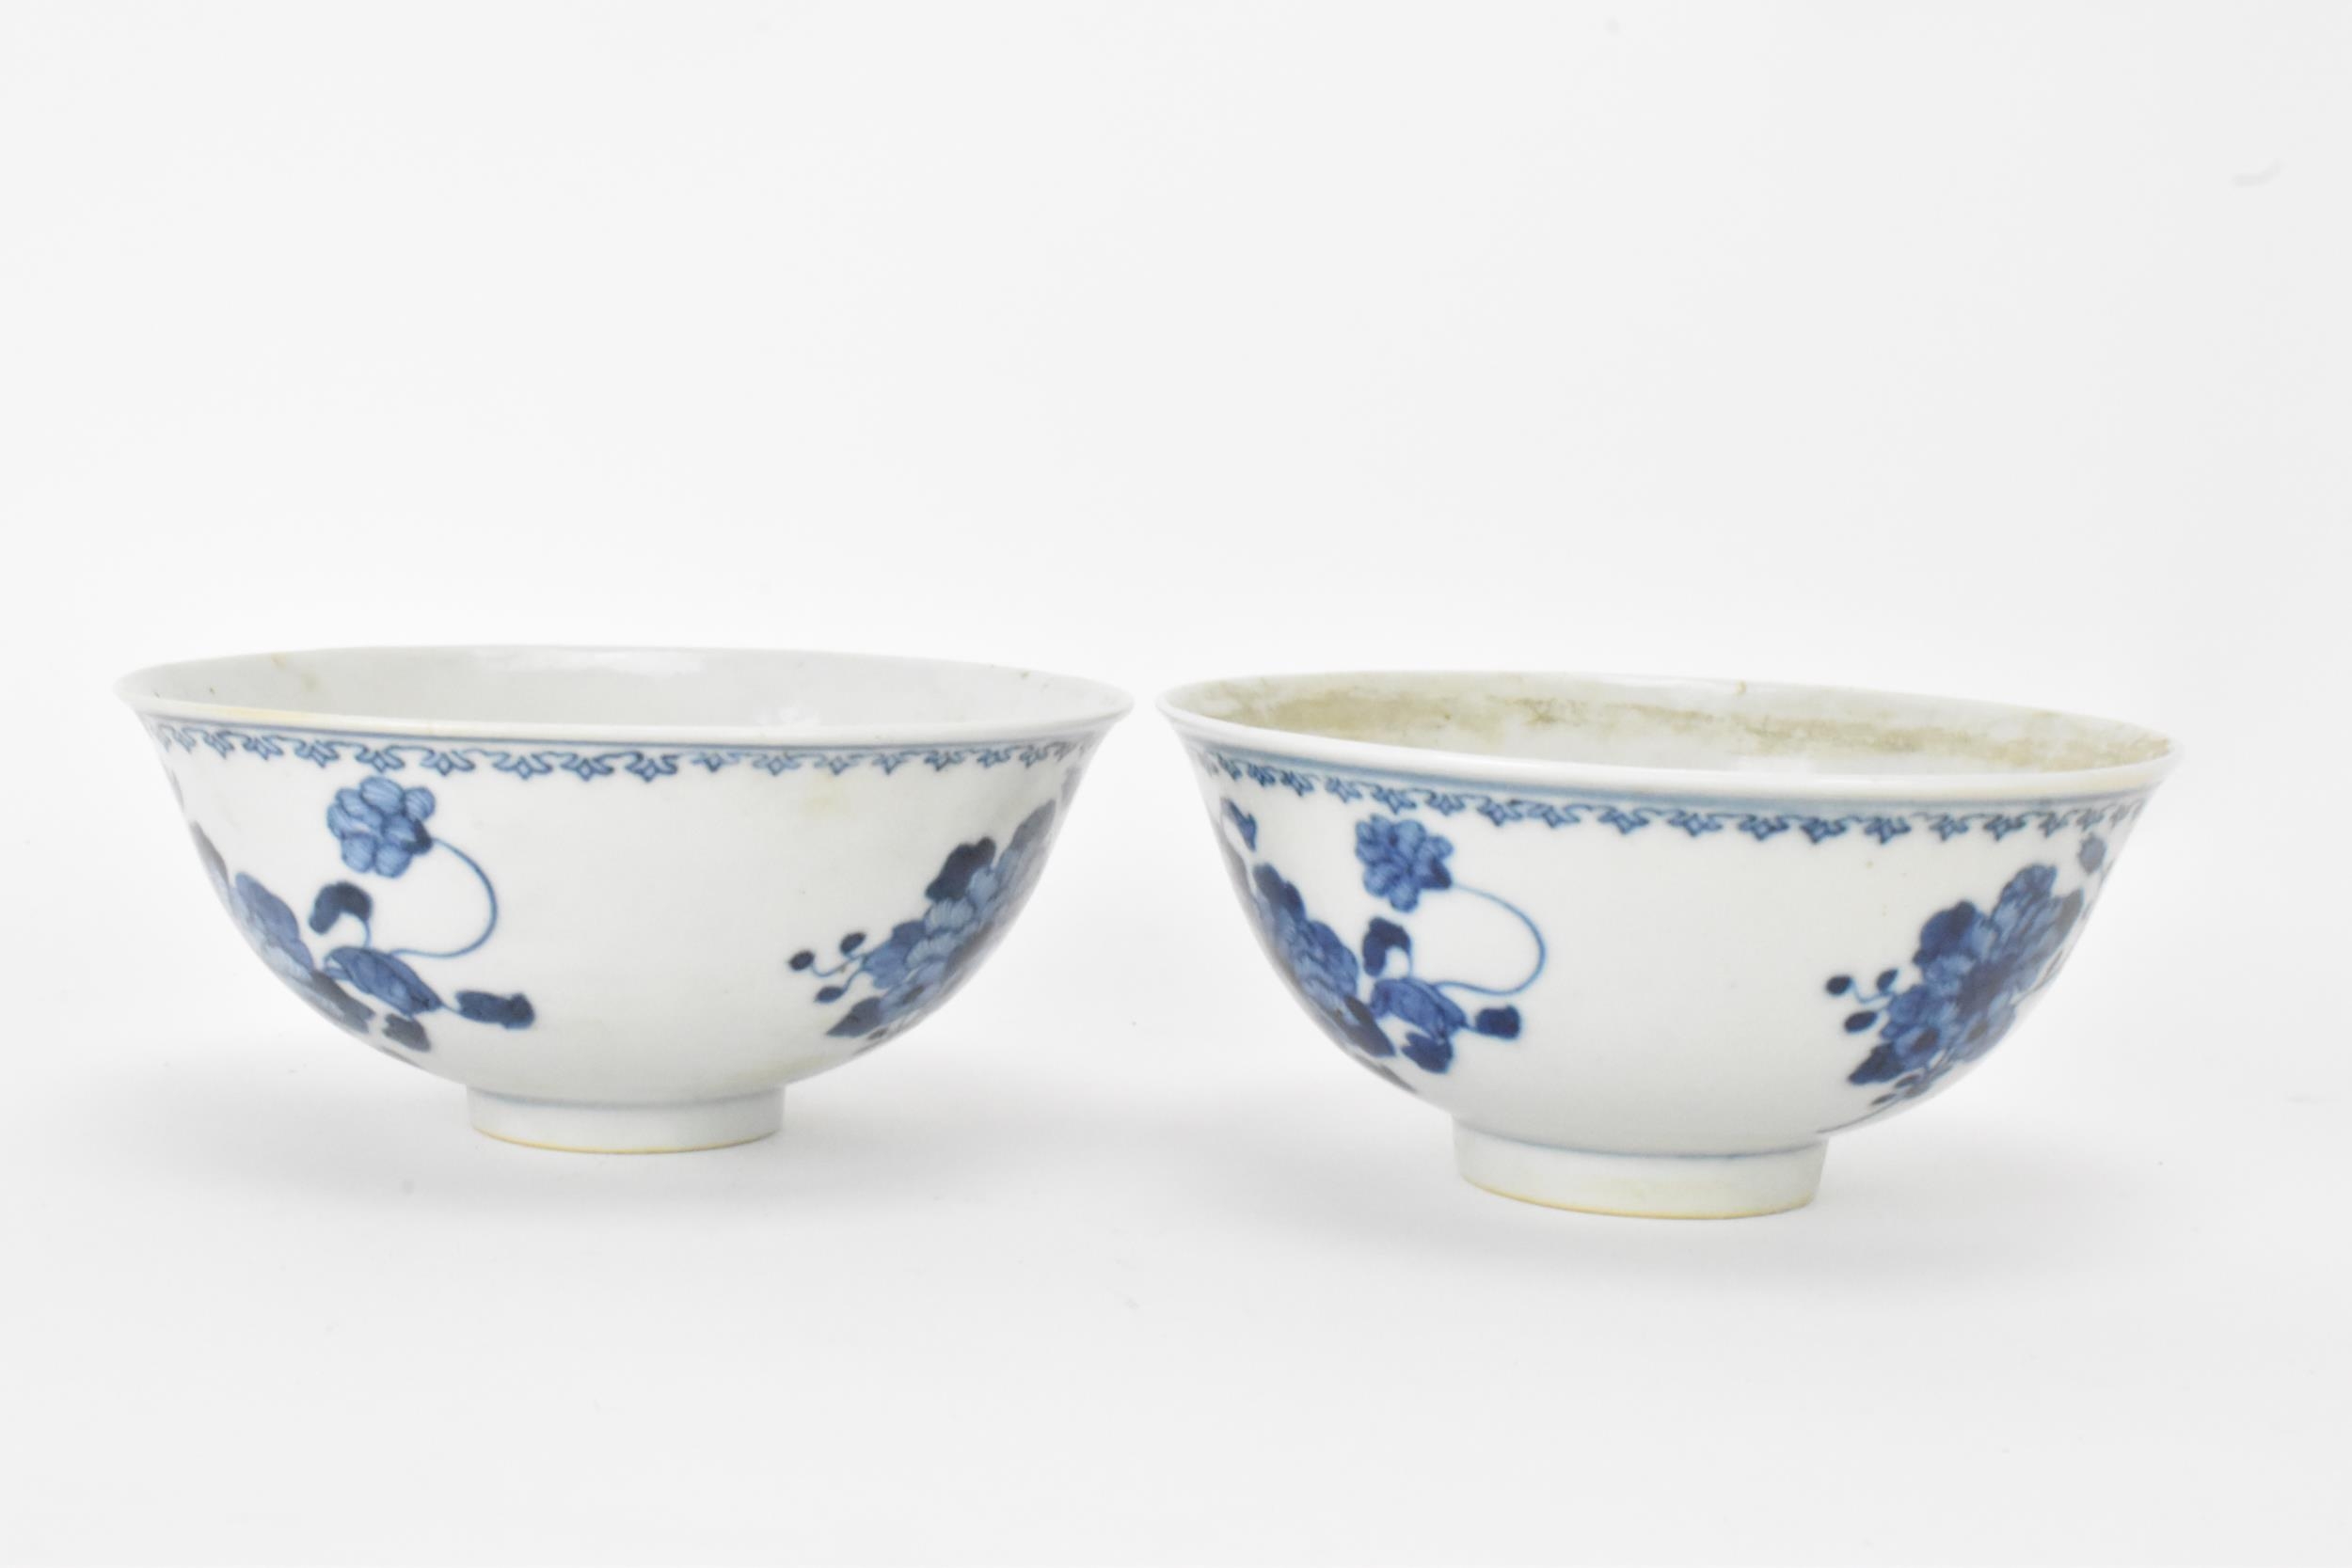 A set of four Qing dynasty, Guangxu period blue and white porcelain bowls, with floral decoration, - Image 8 of 9